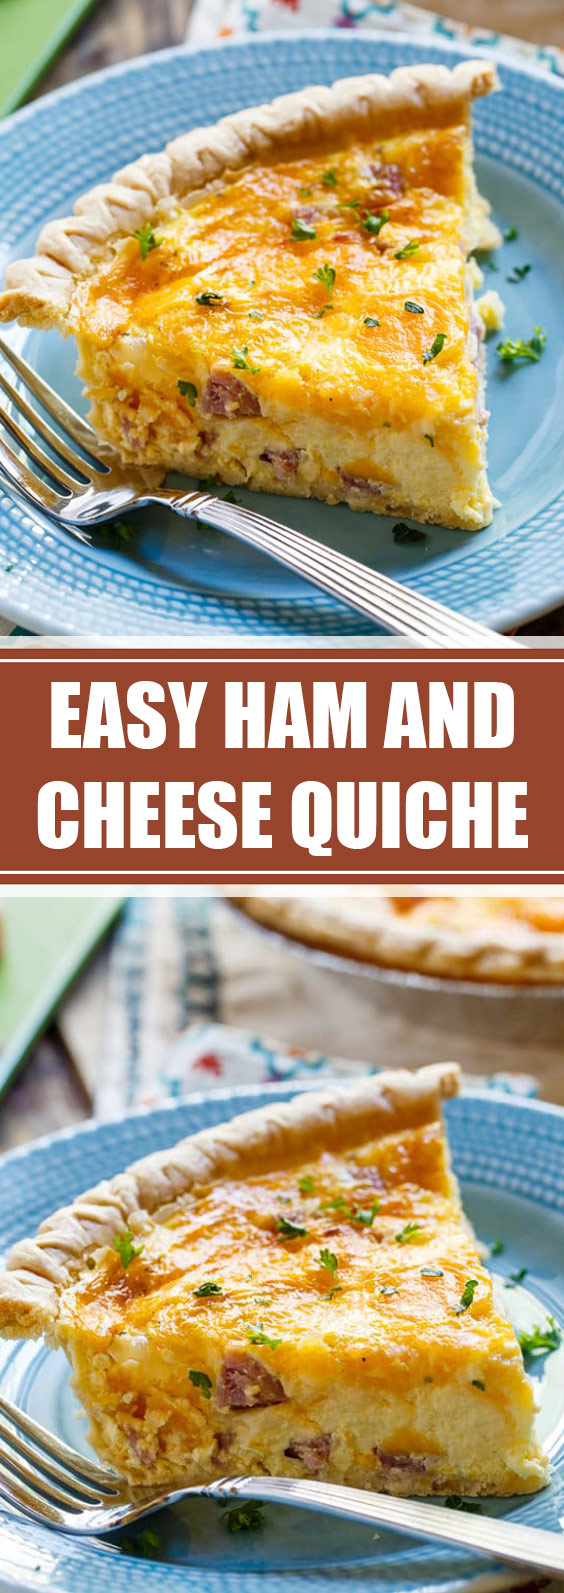 Easy Ham and Cheese Quiche